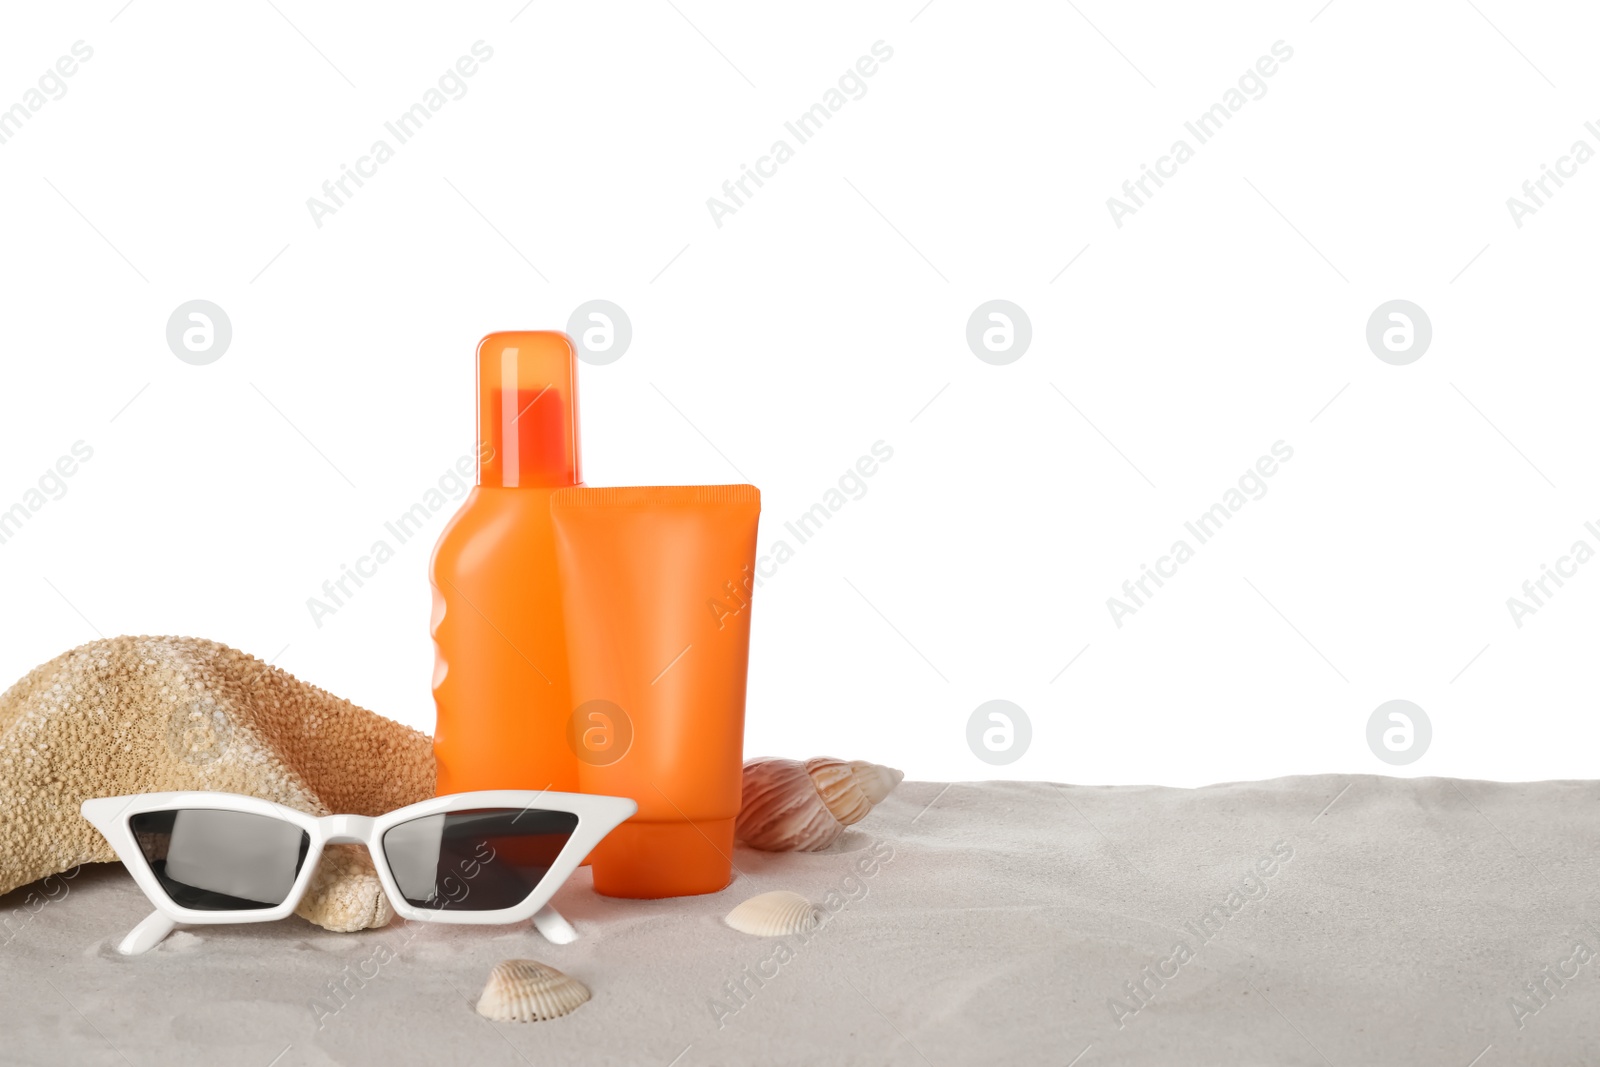 Photo of Composition with sun protection products on sand against white background. Space for text